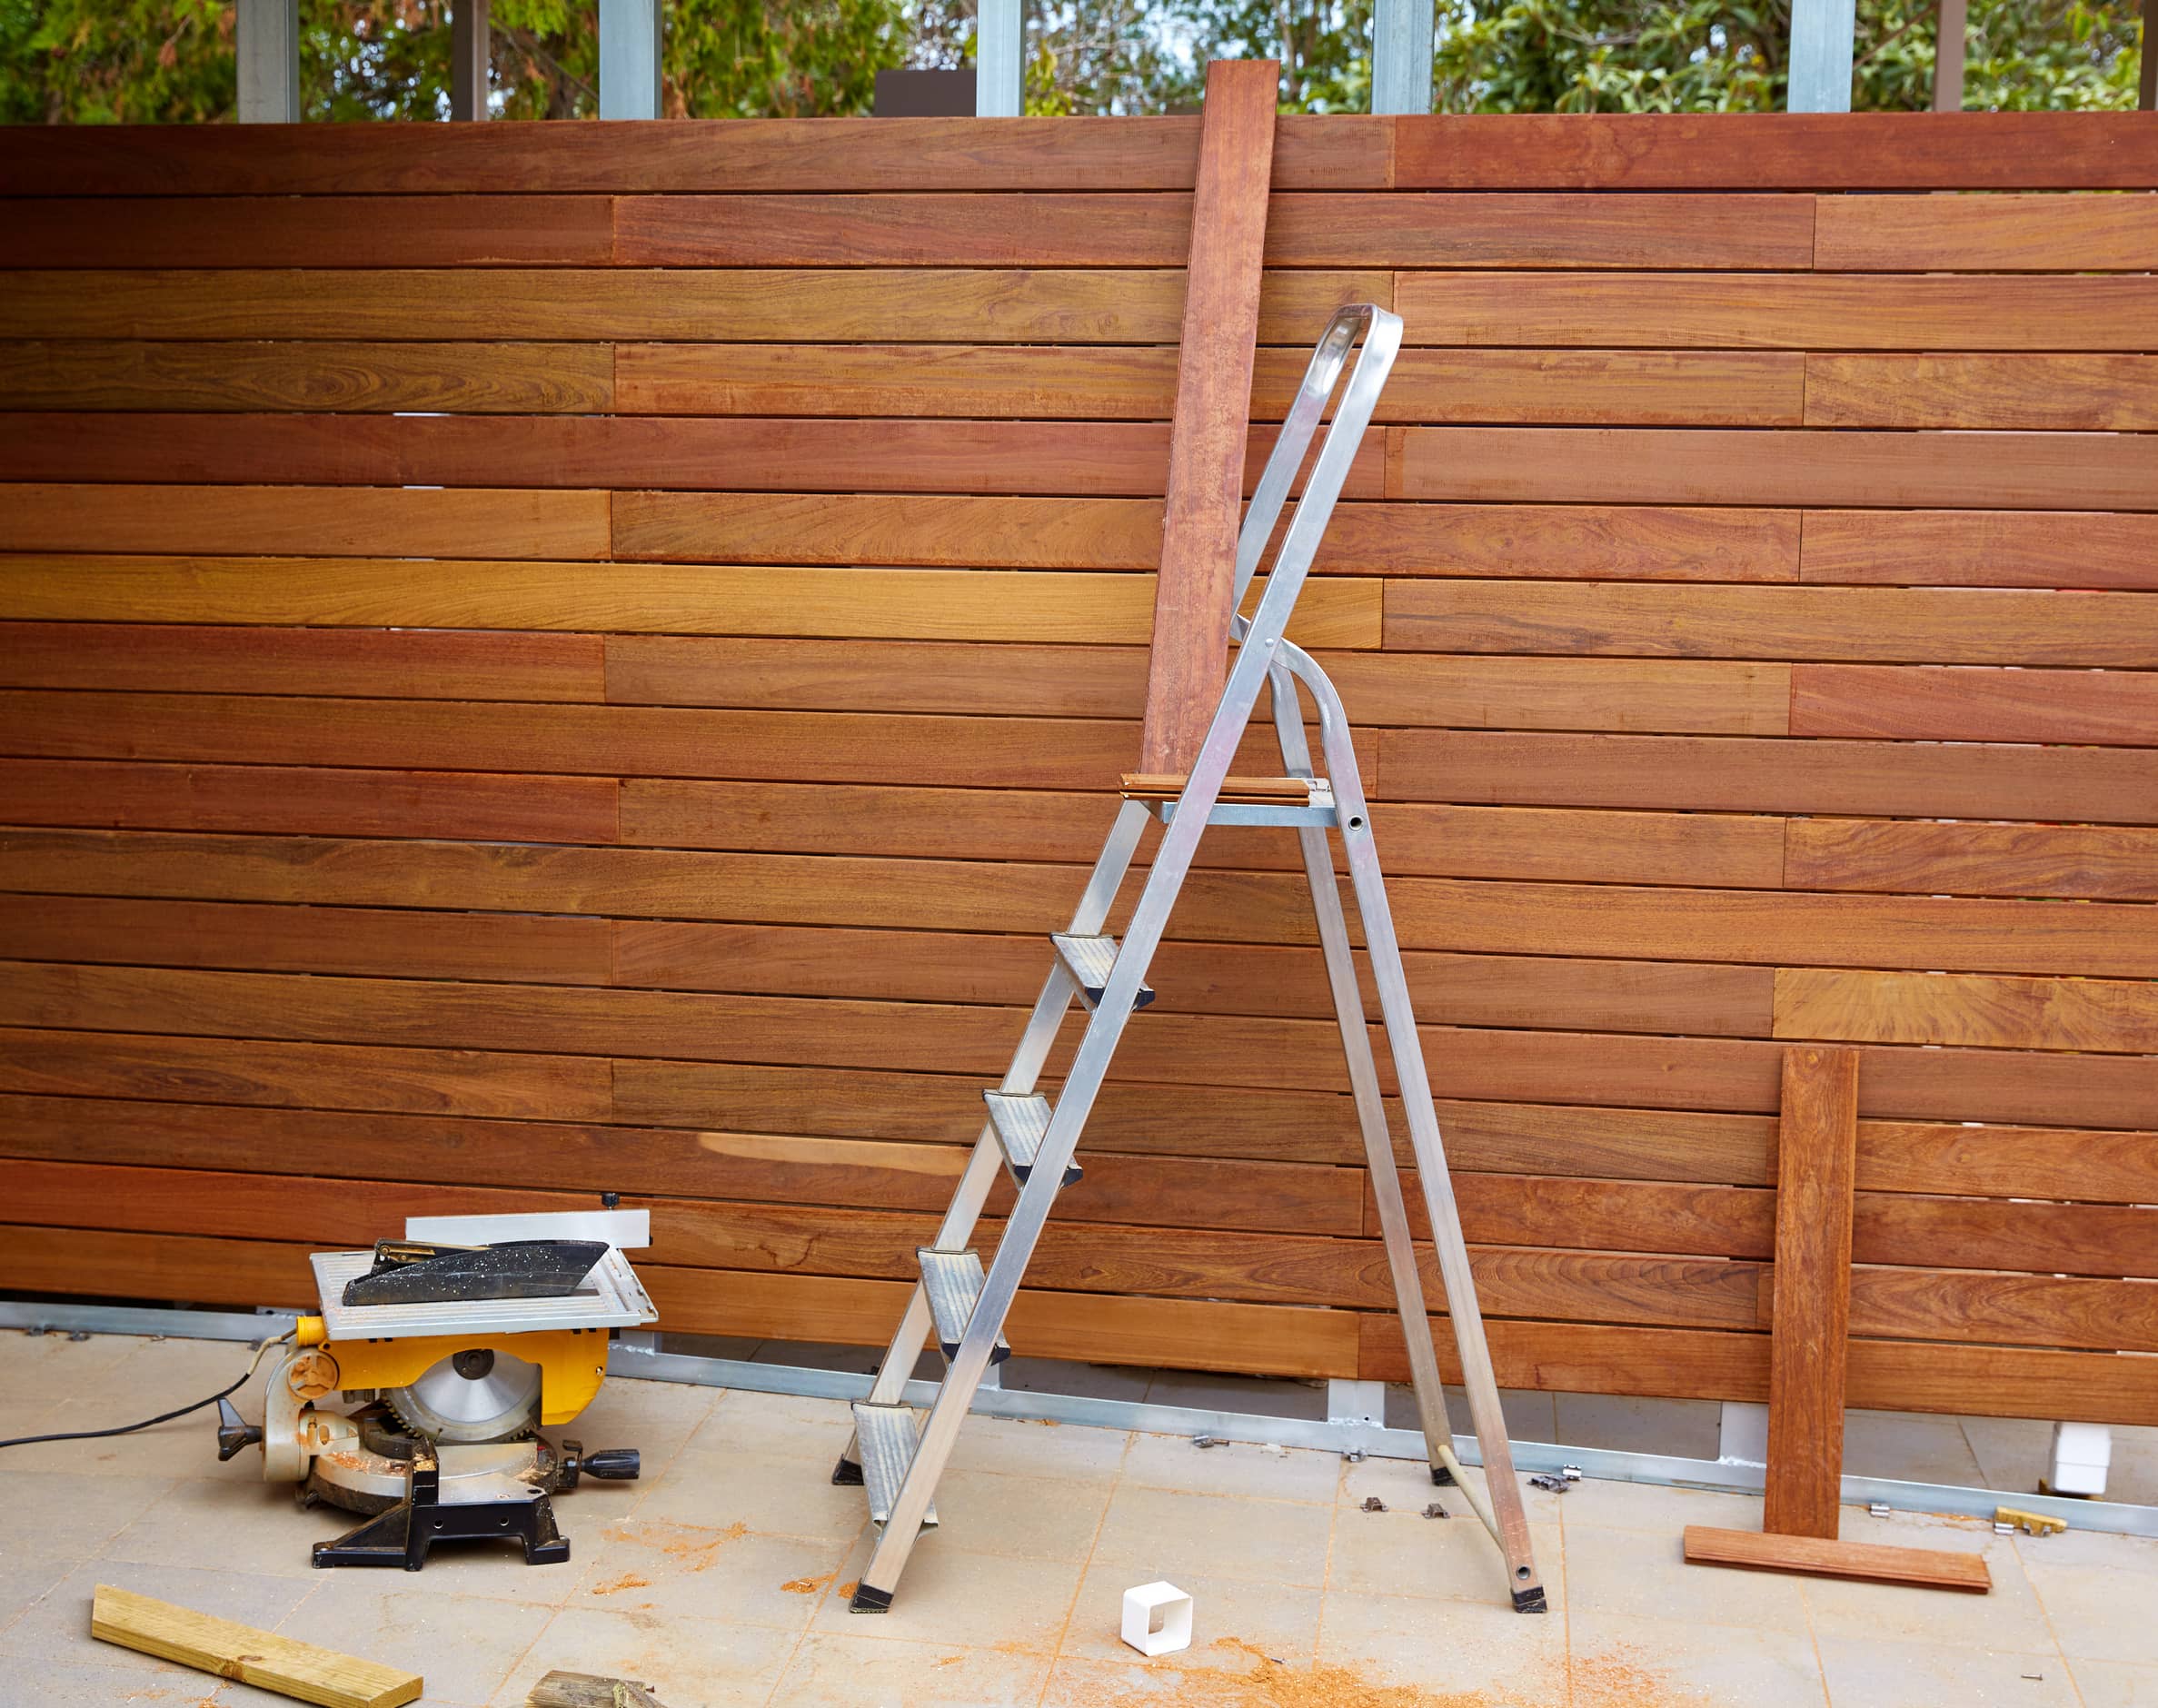 An image of a nearly finished custom wooden fence.